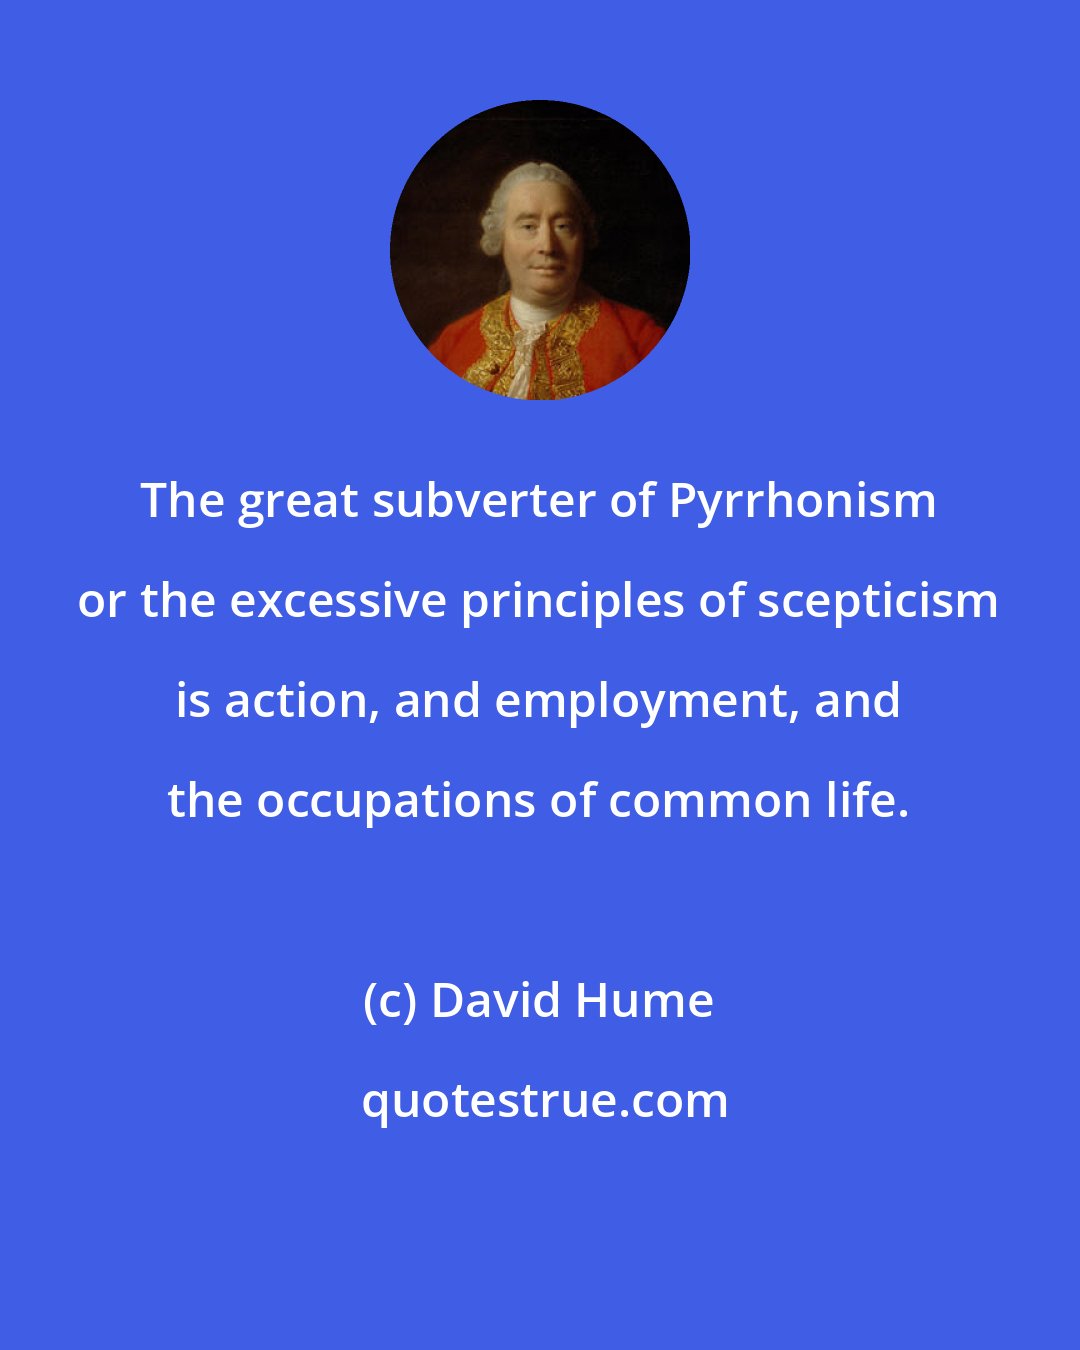 David Hume: The great subverter of Pyrrhonism or the excessive principles of scepticism is action, and employment, and the occupations of common life.